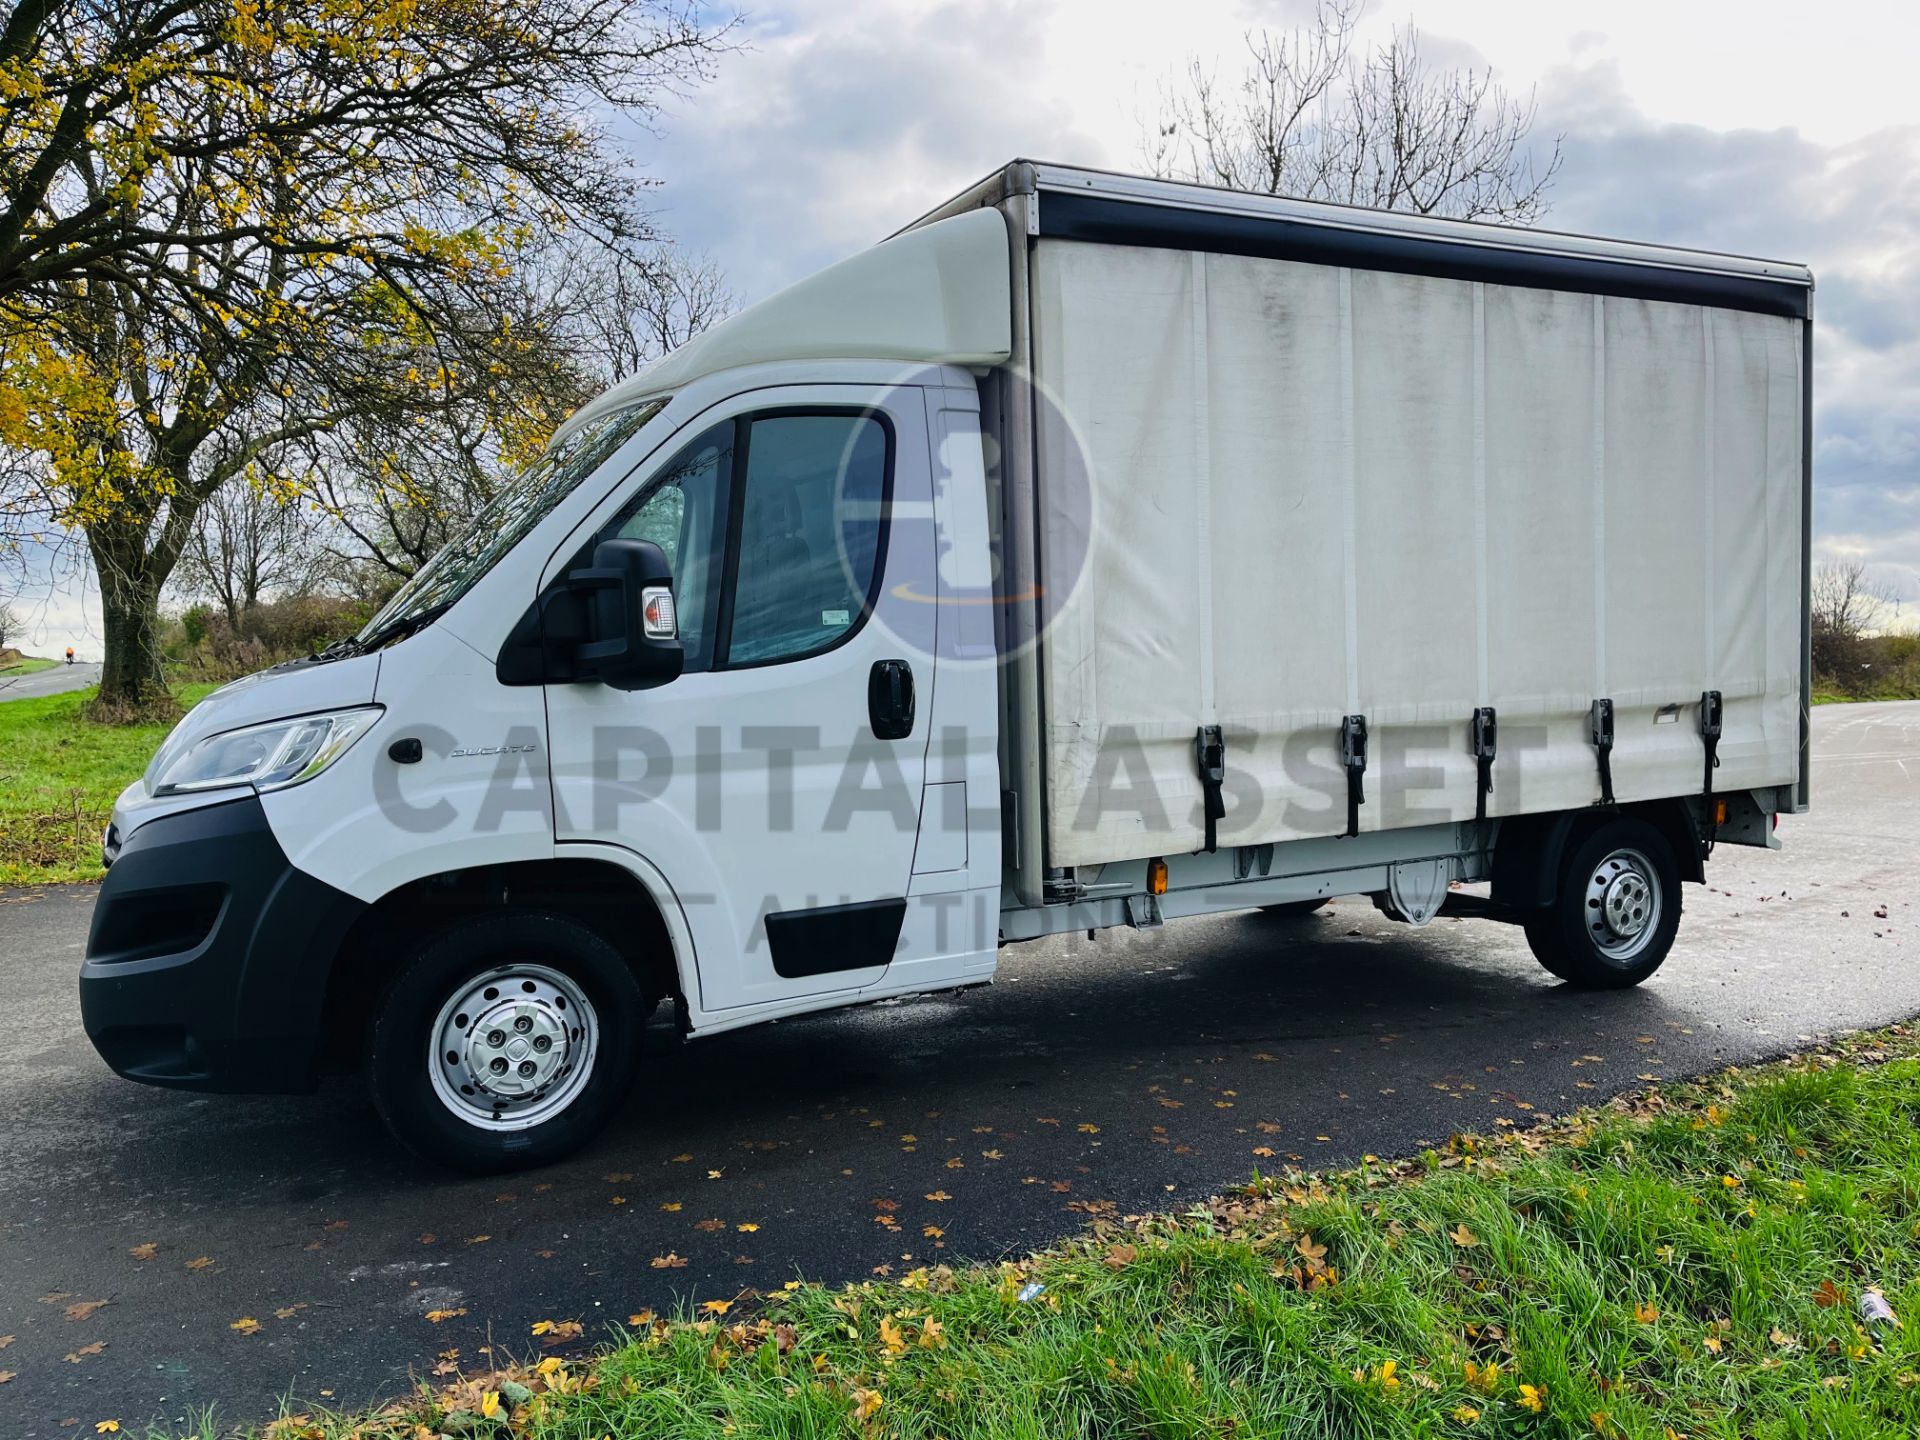 (ON SALE) FIAT DUCATO 2.3 MULTIJET (2019 MODEL) RARE CURTAIN SIDE BODY - 1 OWNER - 360 CAMERA VIEW - Image 7 of 24